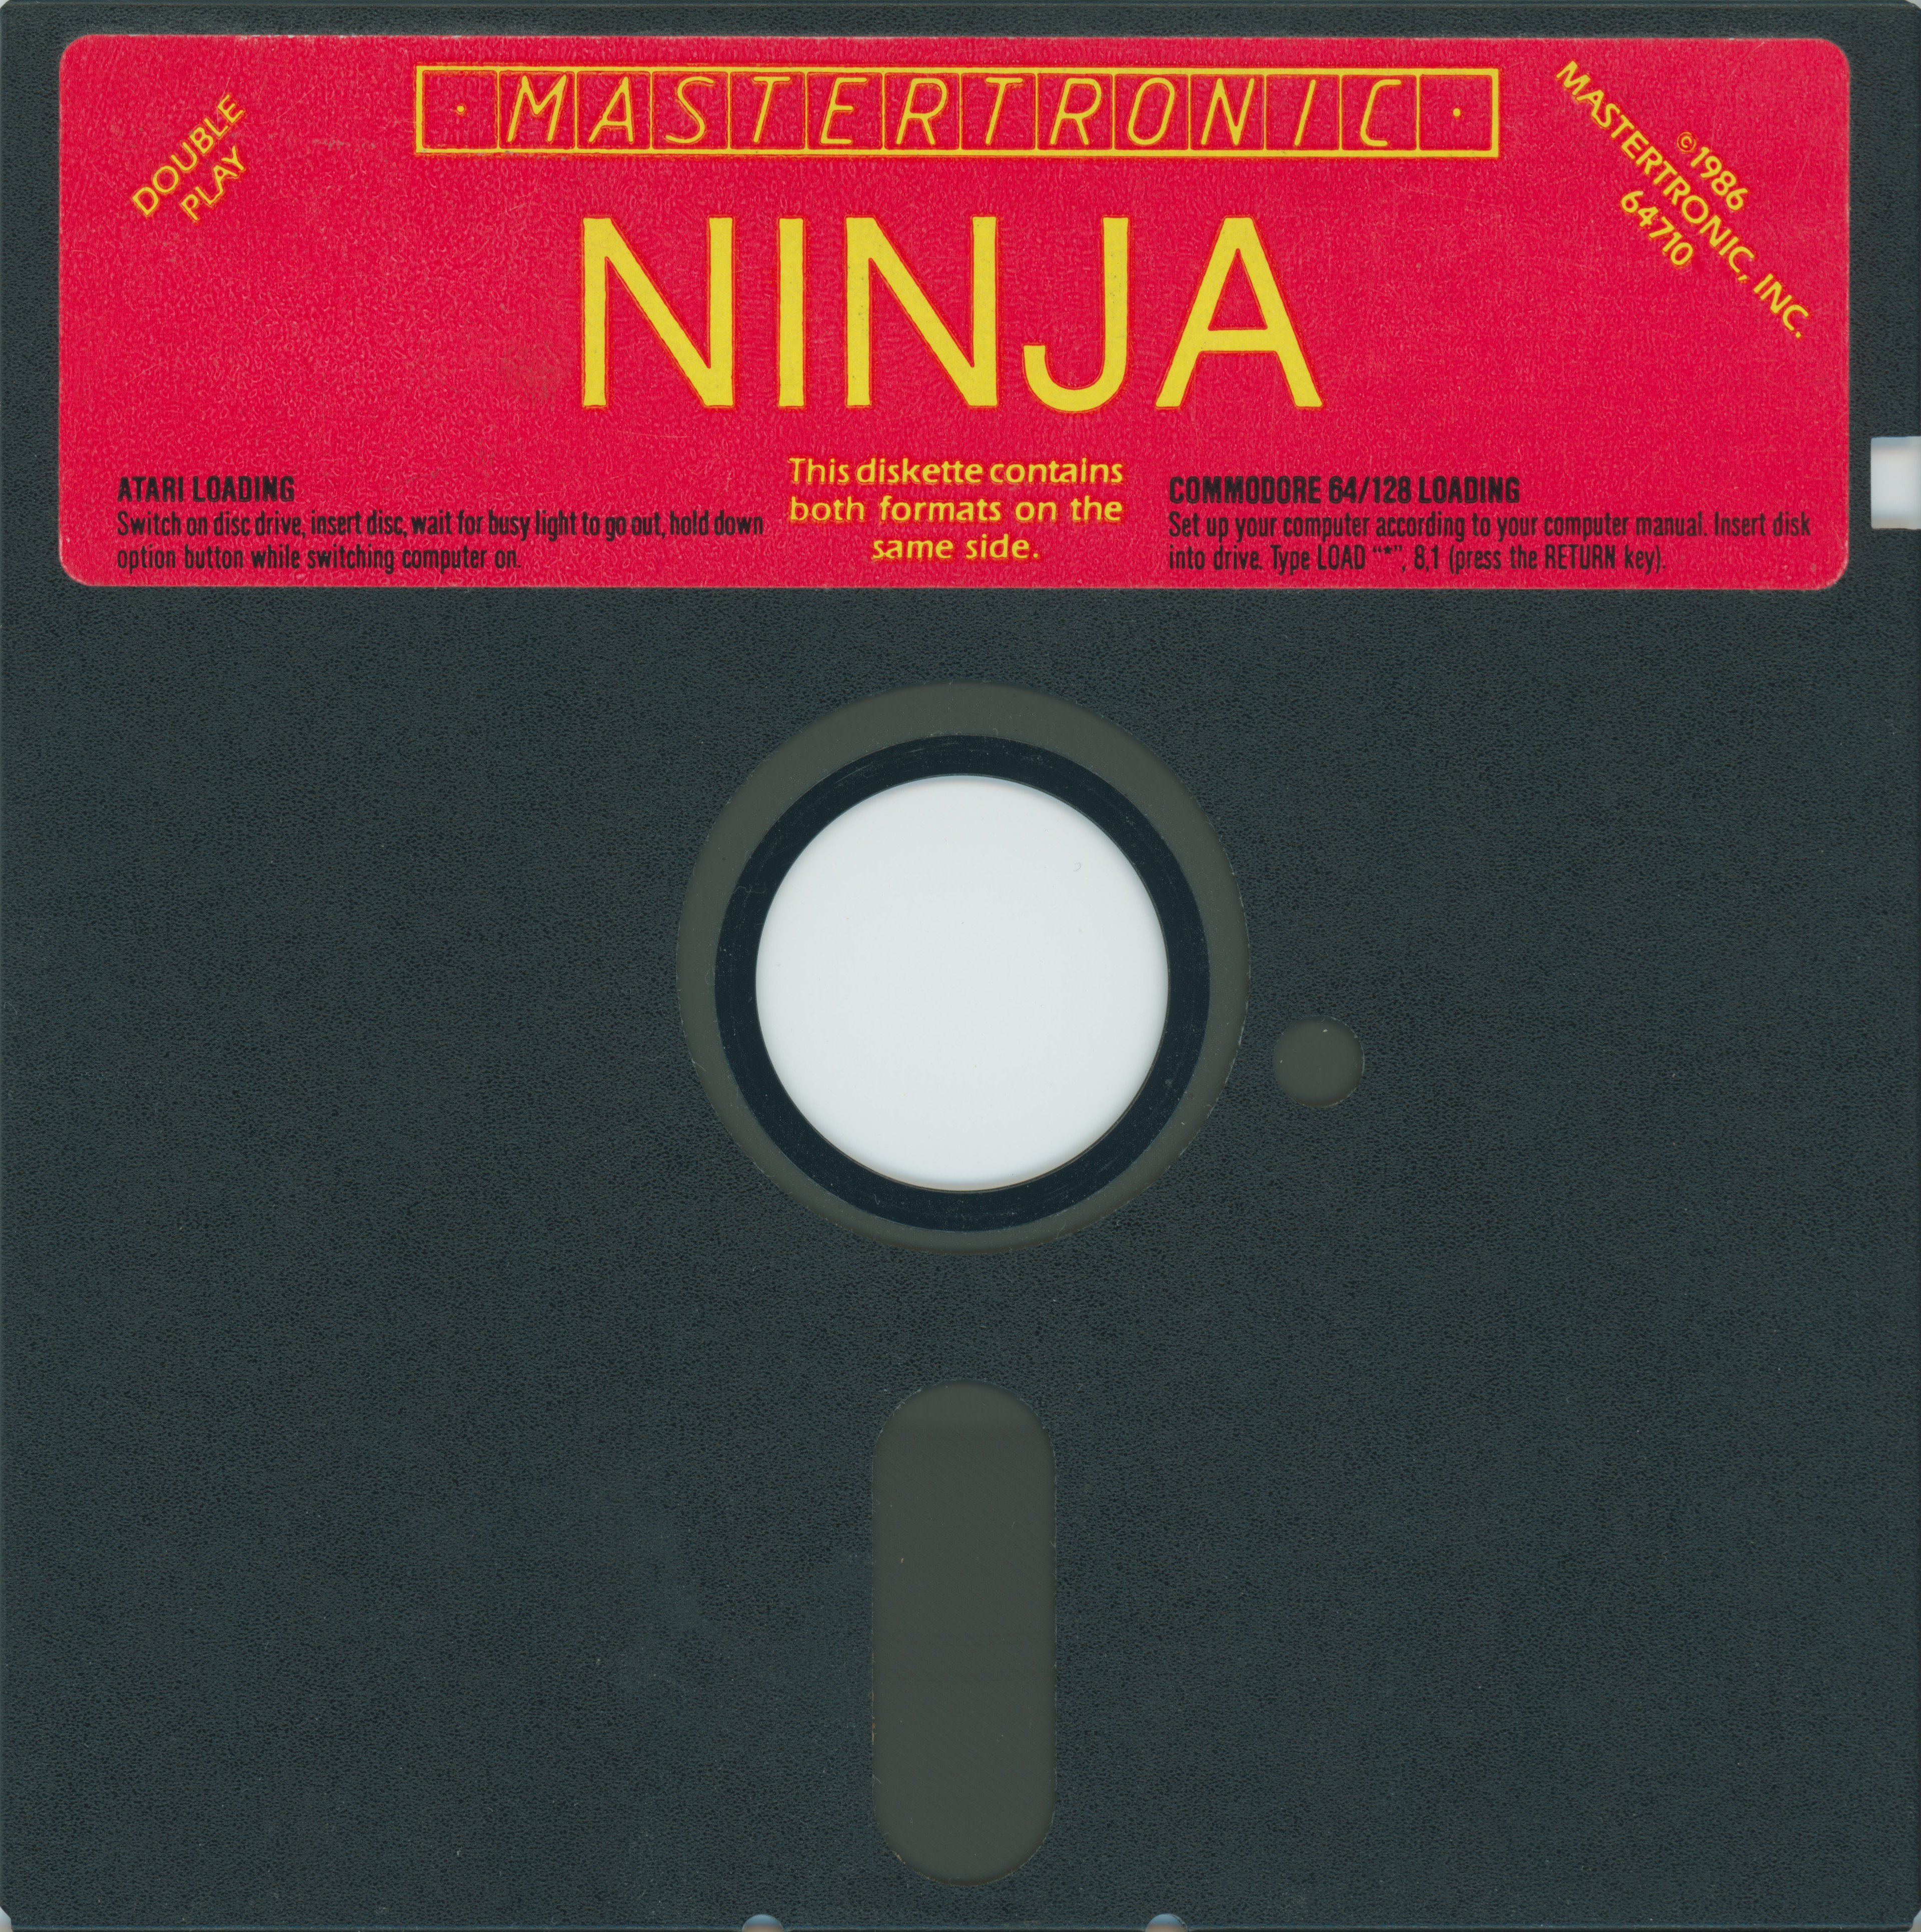 Ninja [64710] (Commodore 64) - Floppy Disk Scan (1600 DPI) : Mastertronic :  Free Download, Borrow, and Streaming : Internet Archive